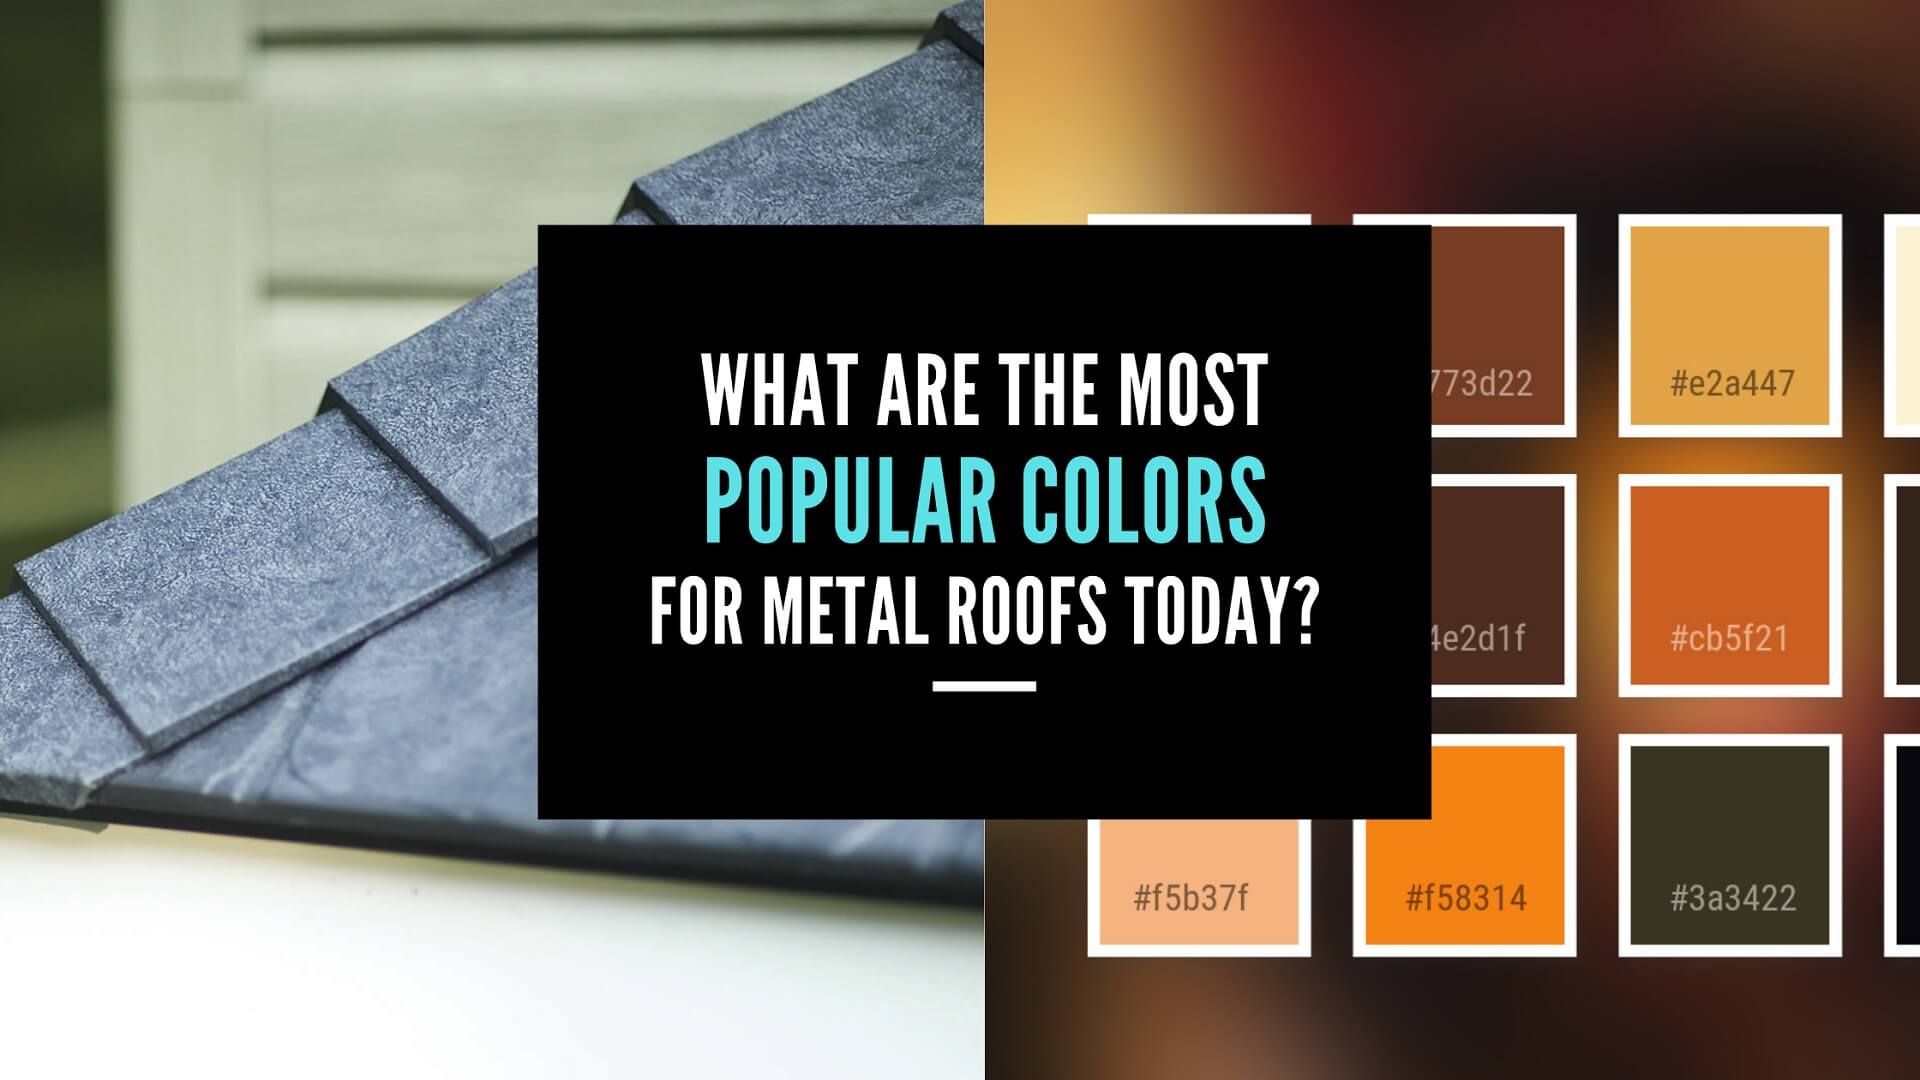 What_are the_most popular colors_for metal roofs today